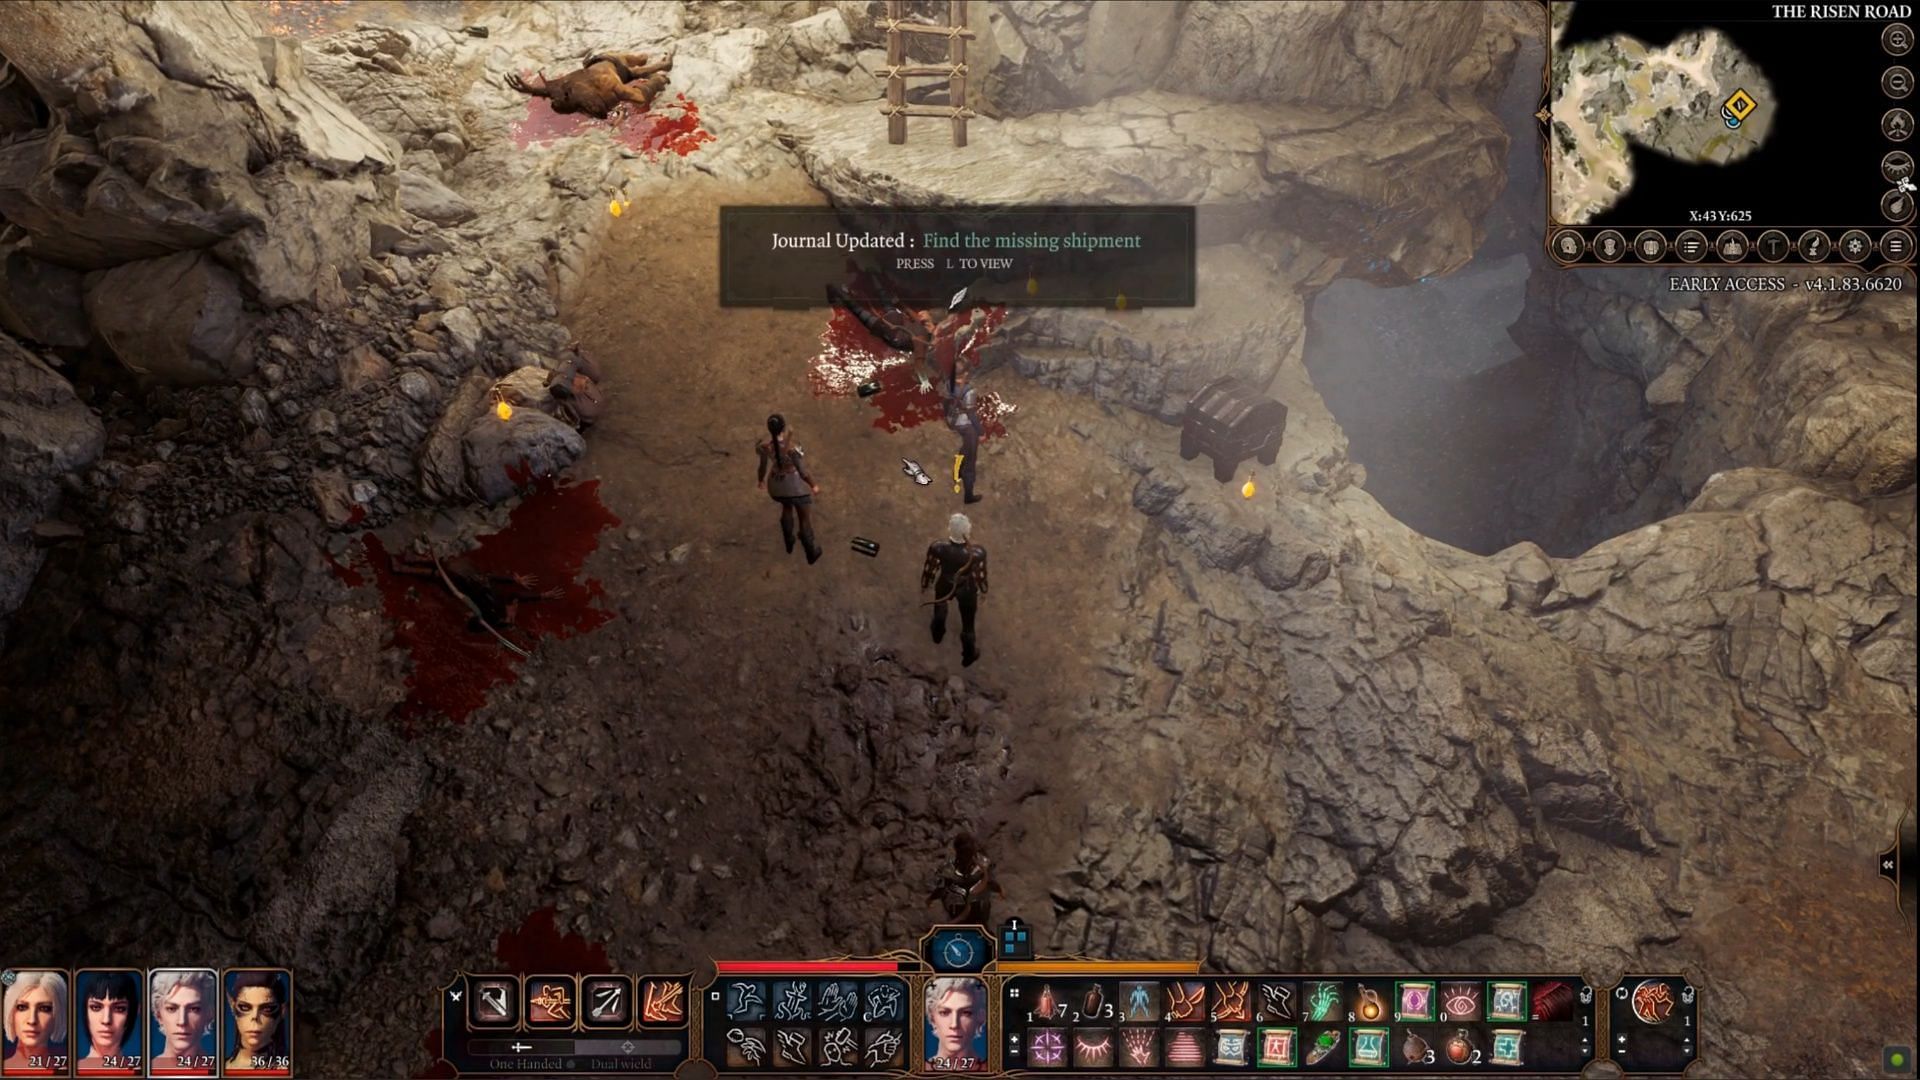 You can take the chest to one of two locations (Image via Larian Studios)